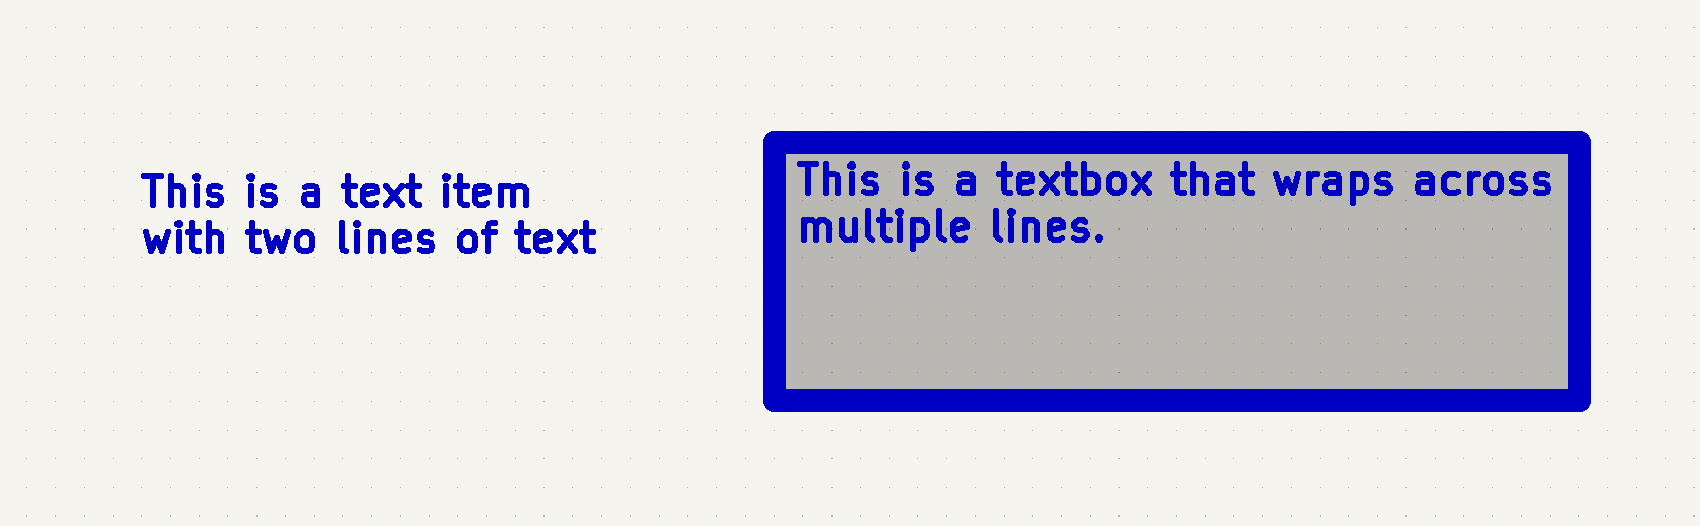 schematic text and textbox example